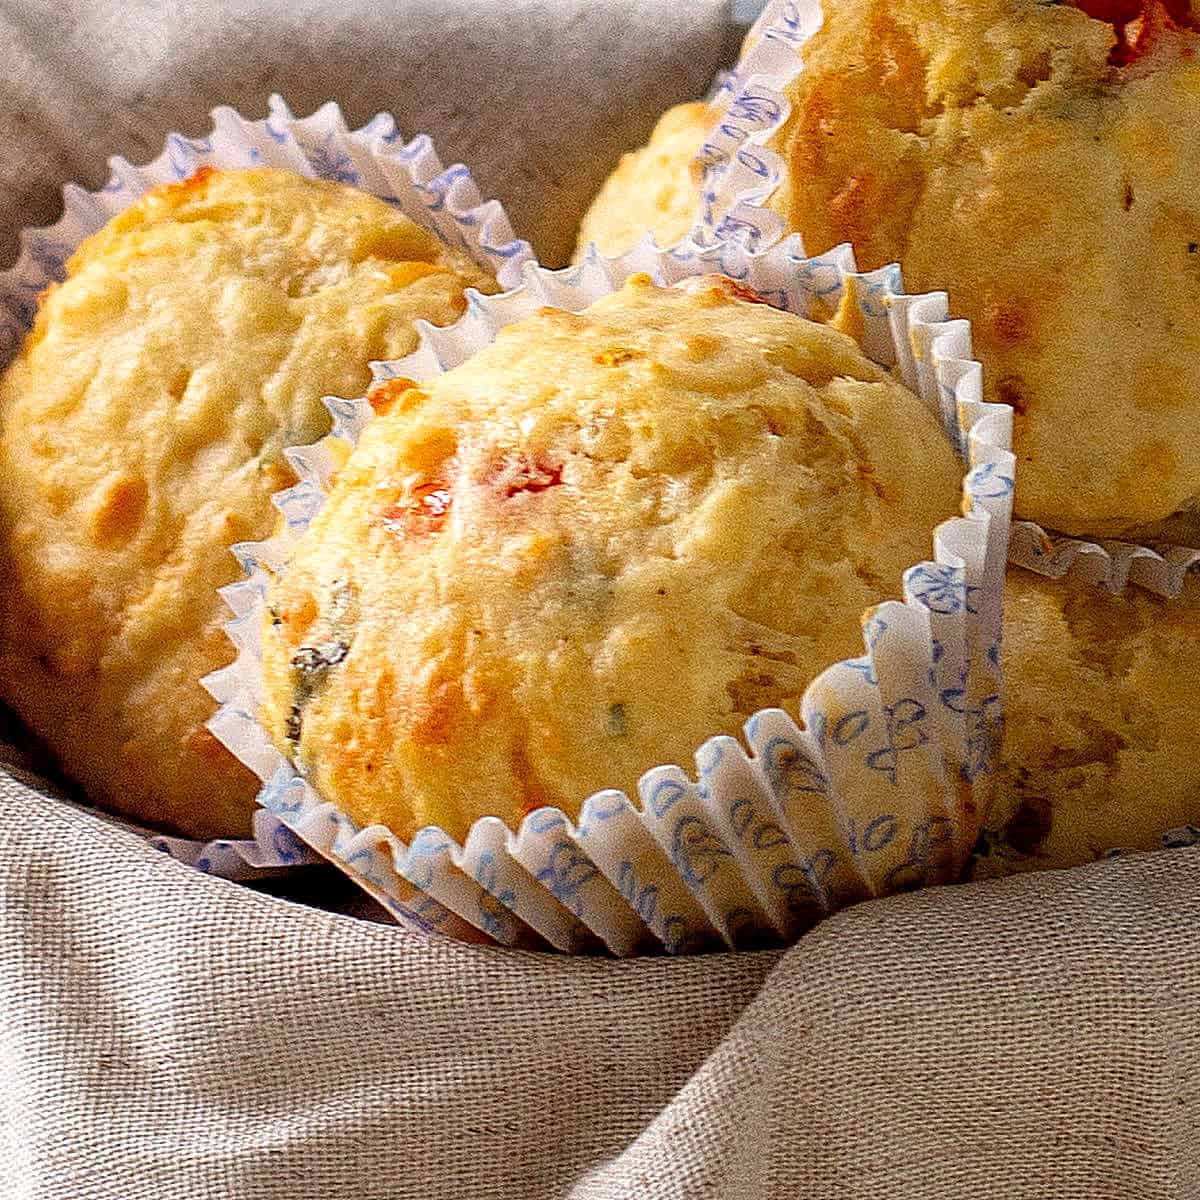 Whole muffins in paper cups on top of a beige piece of linen.